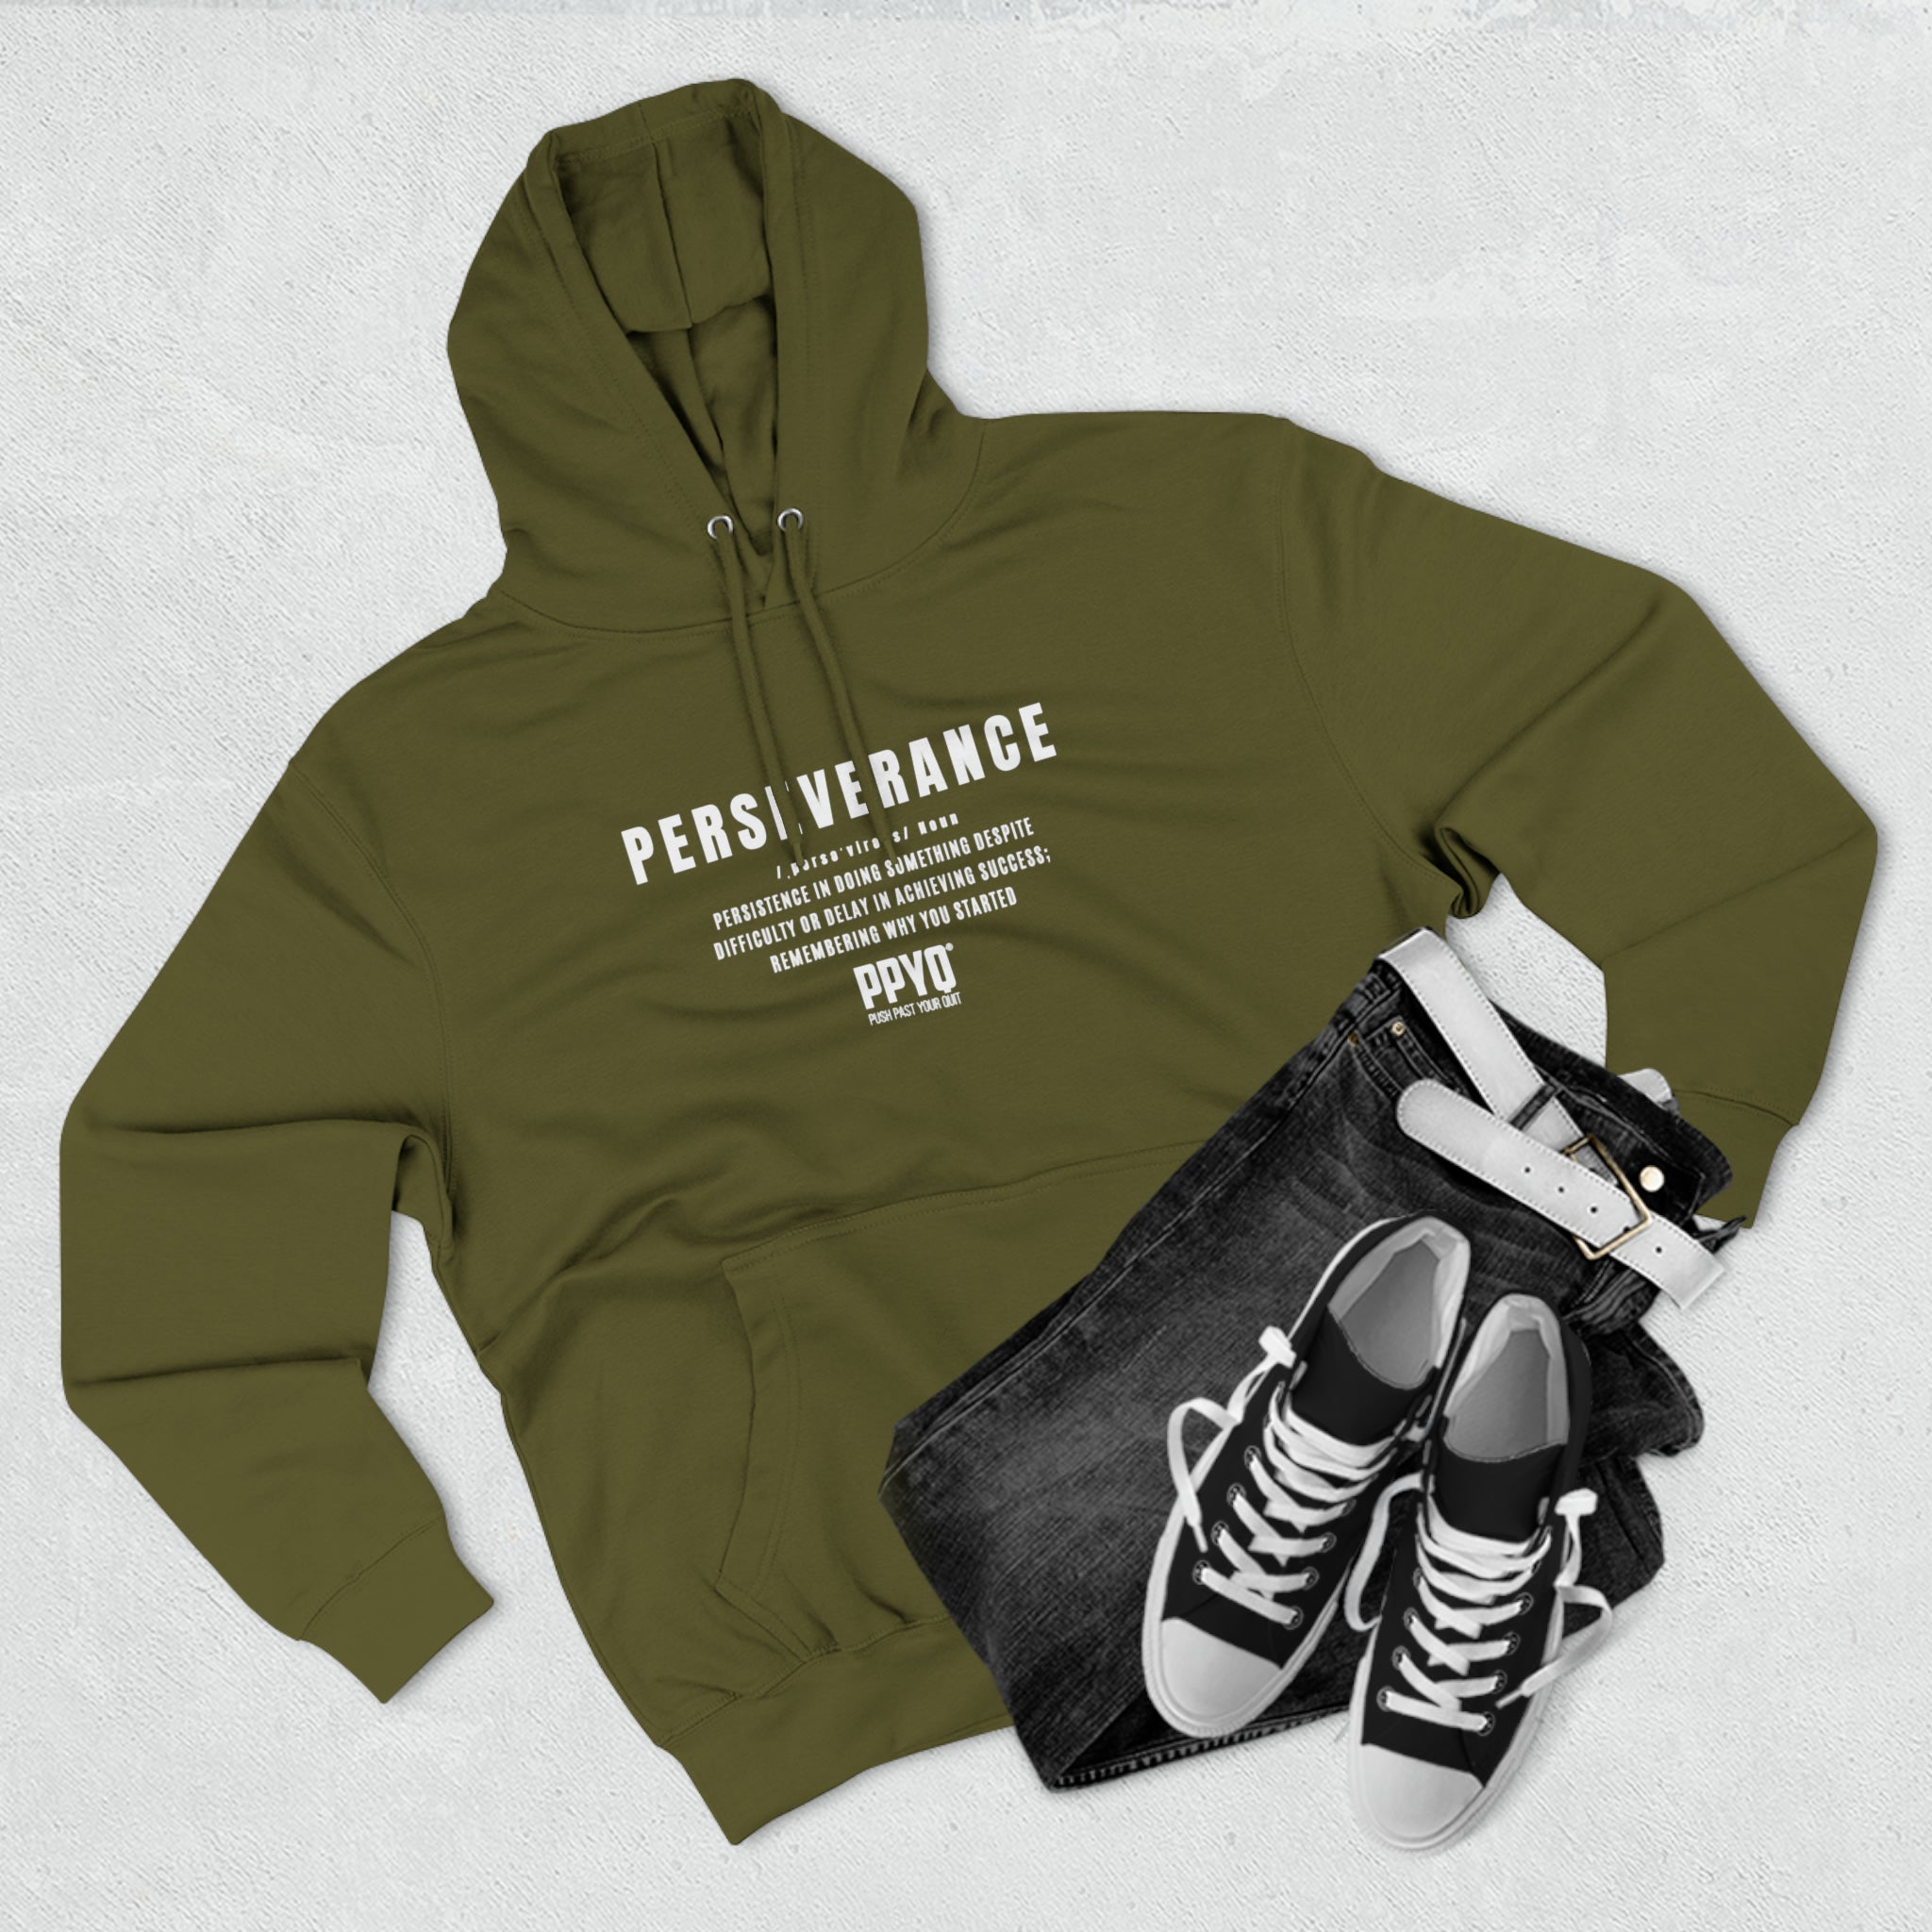 Perseverance PPYQ® Defined  Premium Pullover Hoodie